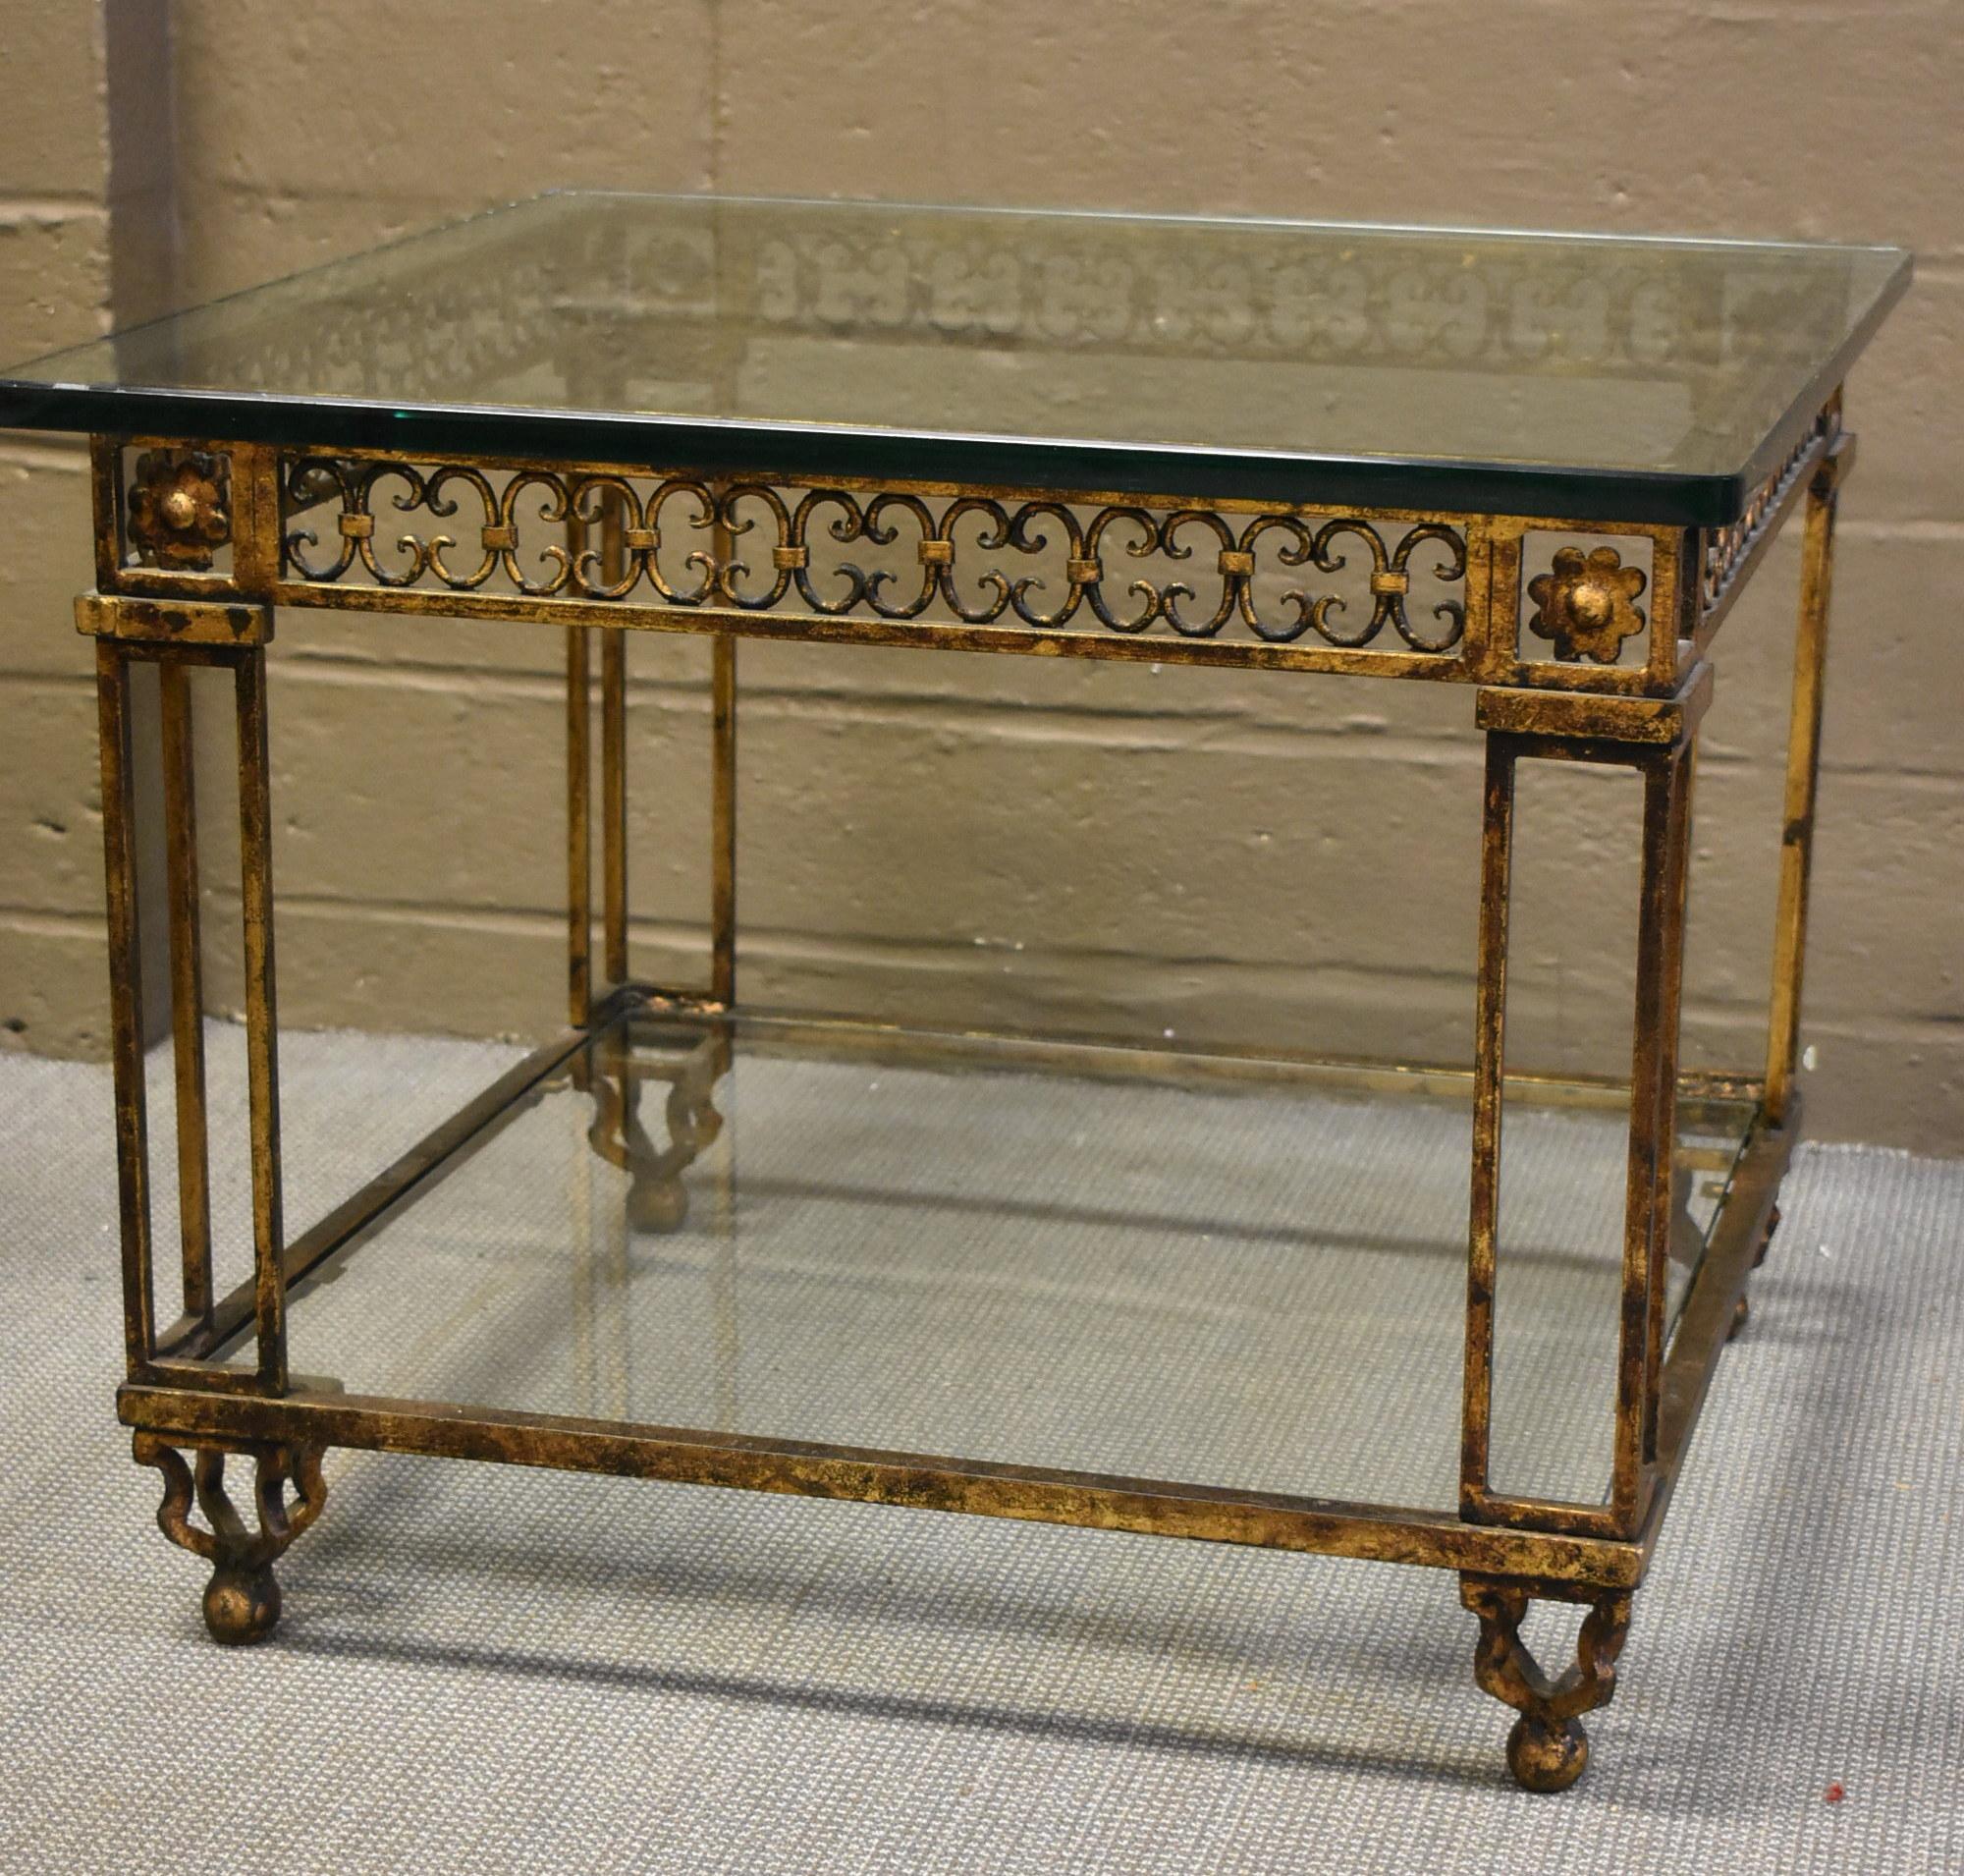 Vintage circa 1940s iron and glass top table with bottom shelf. Antique gold original finish. Green 3/4